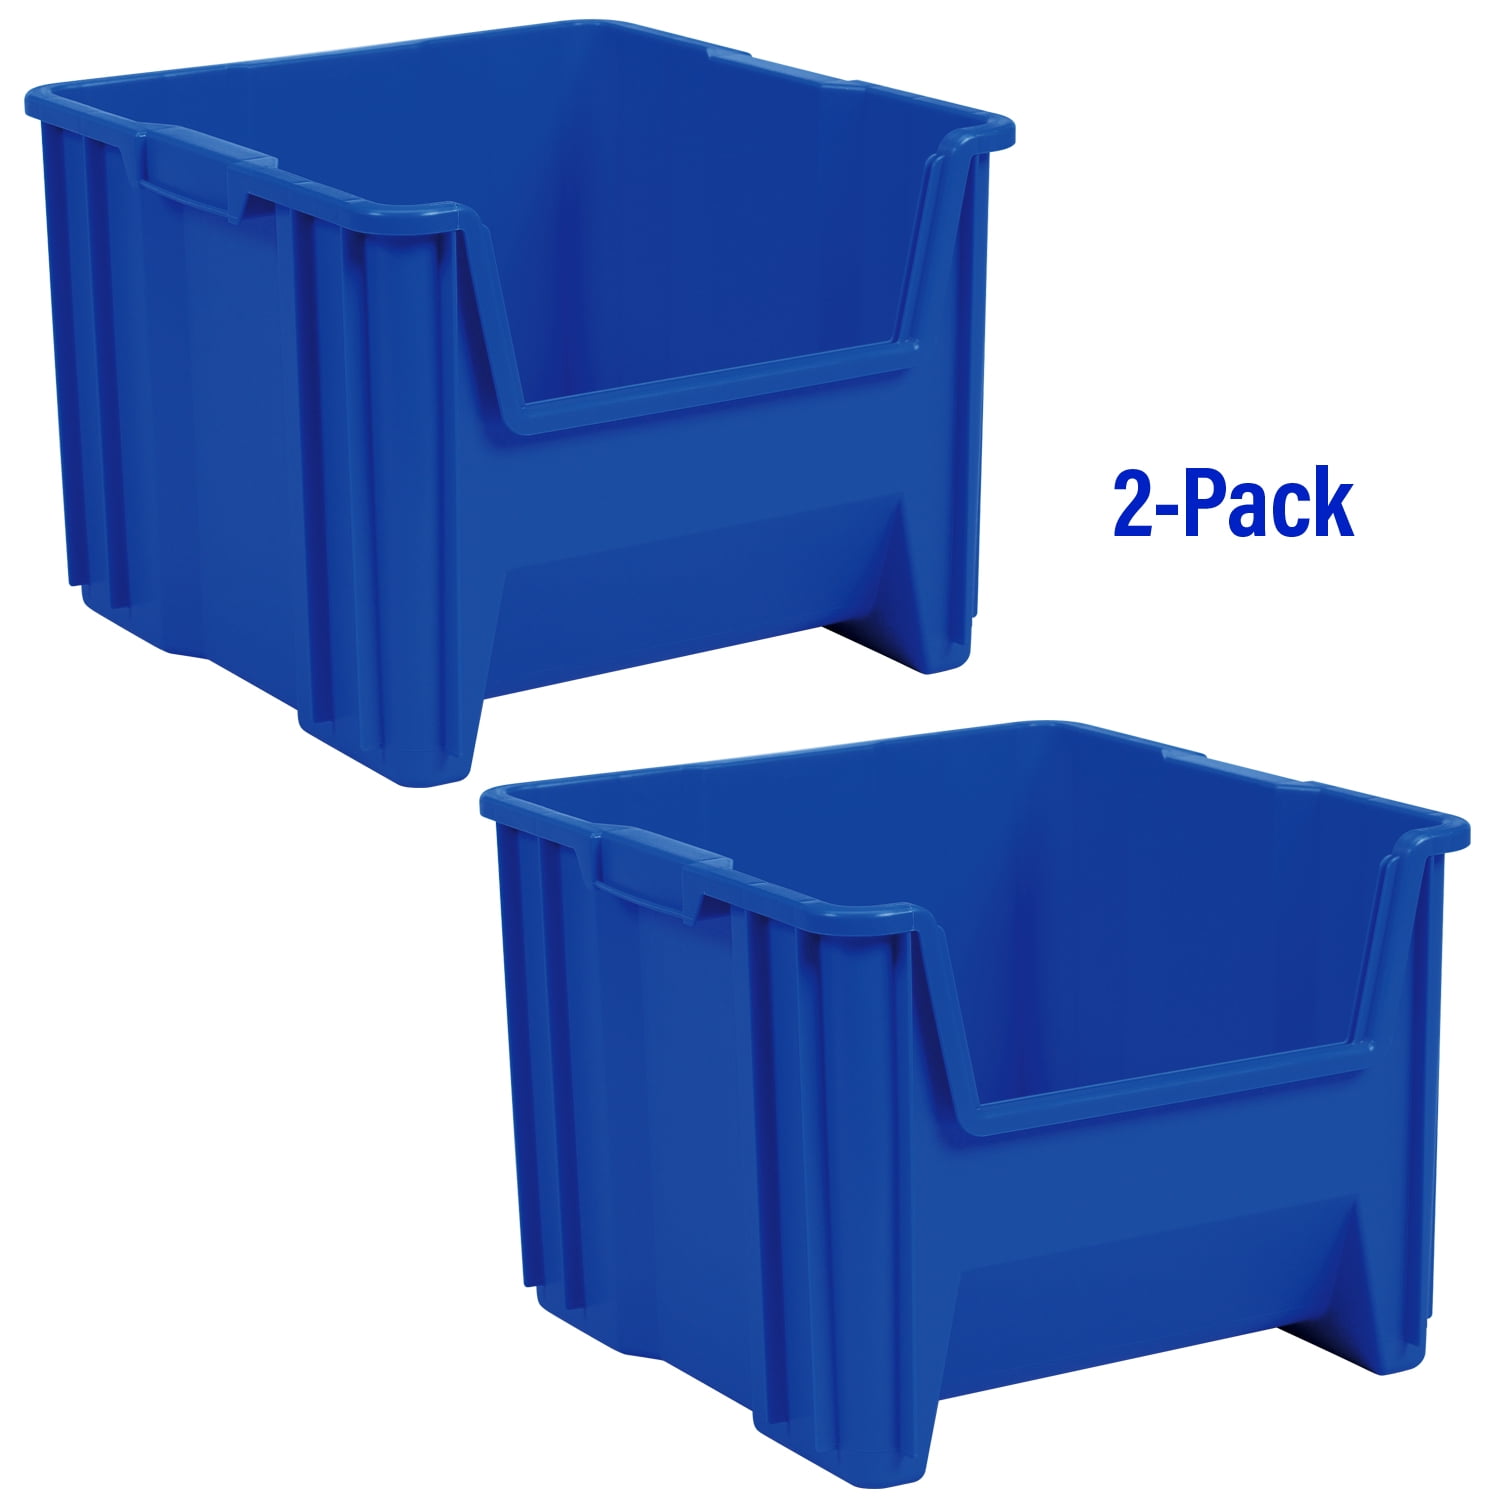  Blue Plastic Storage Totes and Stackable Storage Bins -  Industrial Strength Containers for Organizing at the Office and Home -  Holds Up To 80 Lbs - 23 x 15 x